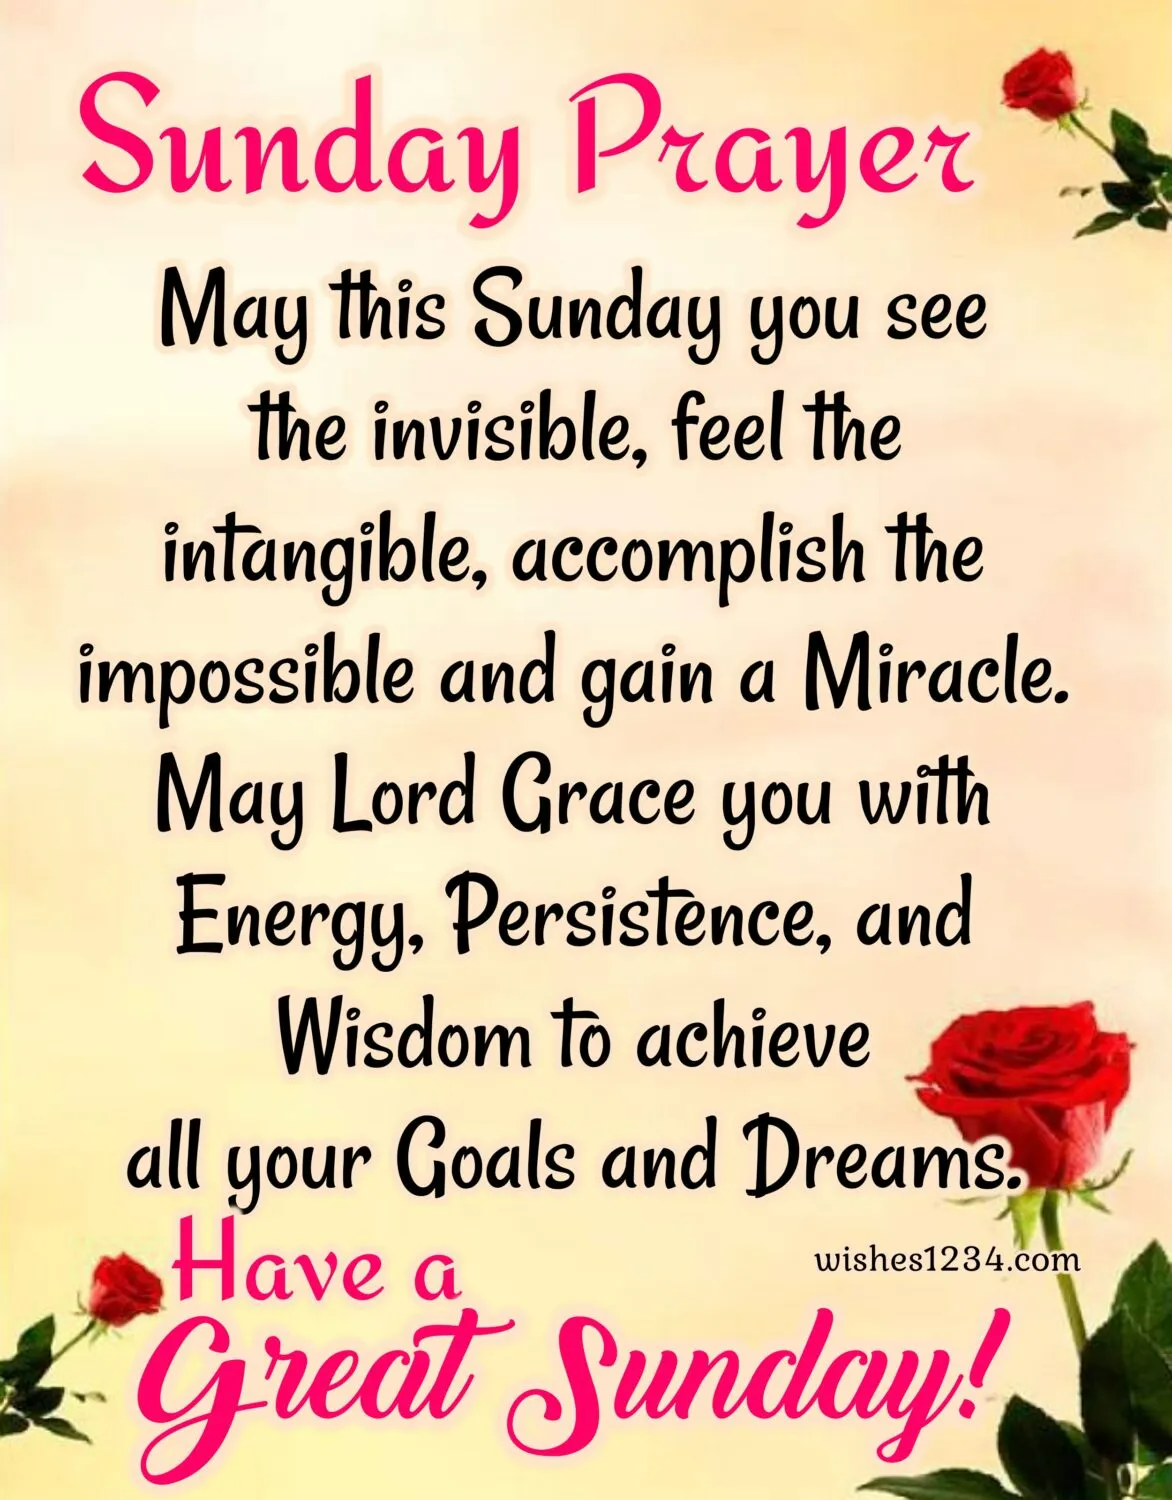 200 Happy Sunday Sunday Blessings Quotes Images wishes